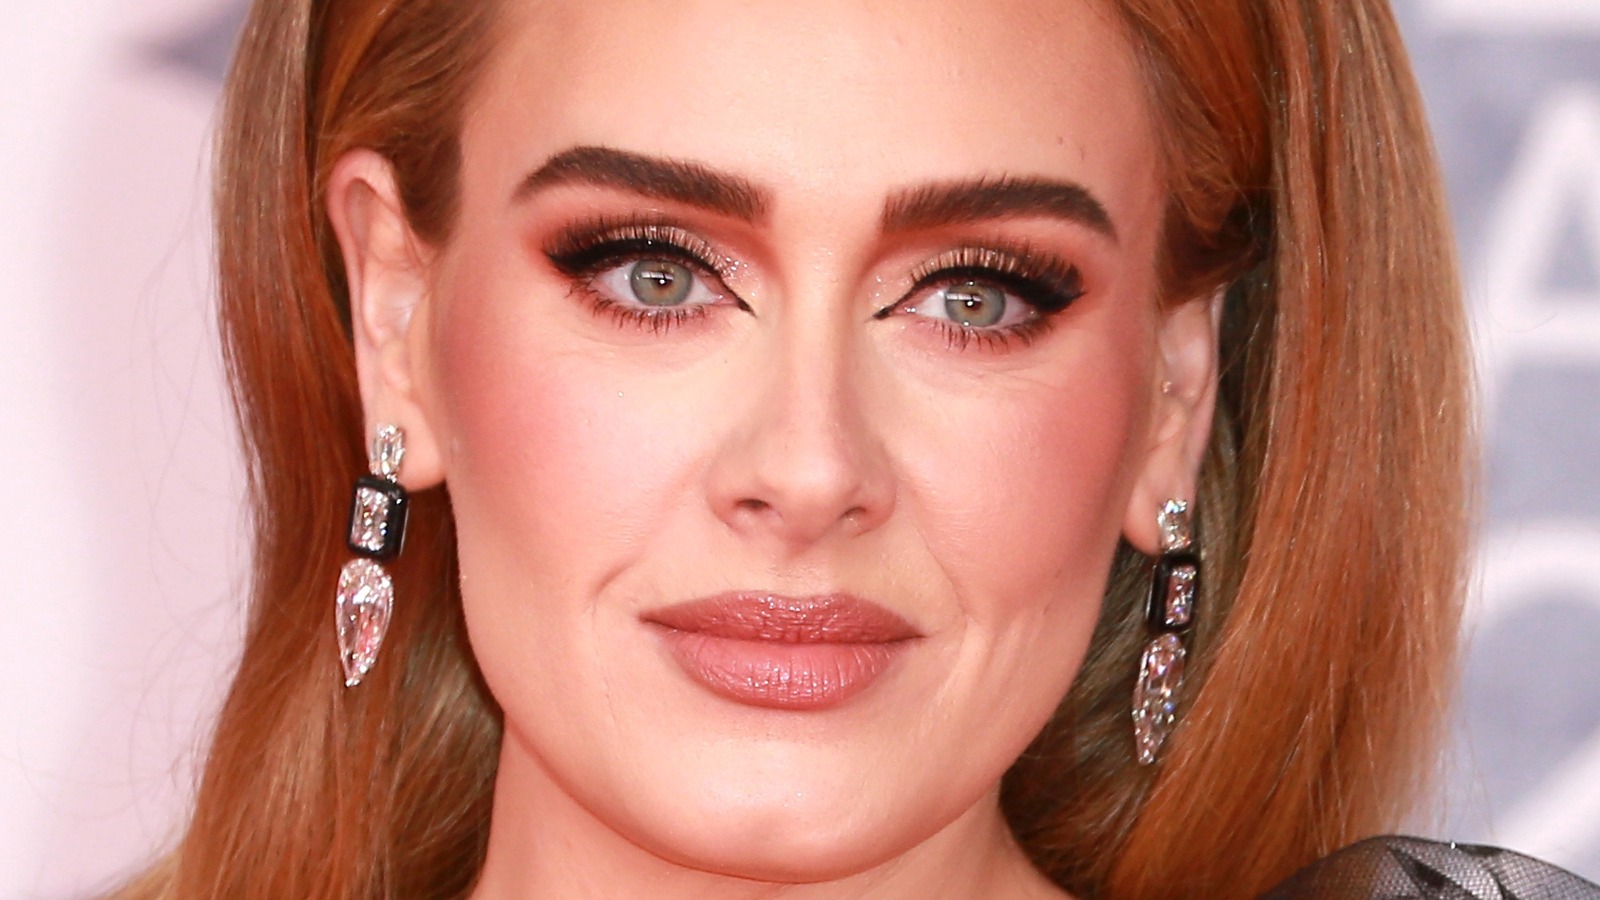 Of All Adele's Looks - This Stands Above The Rest